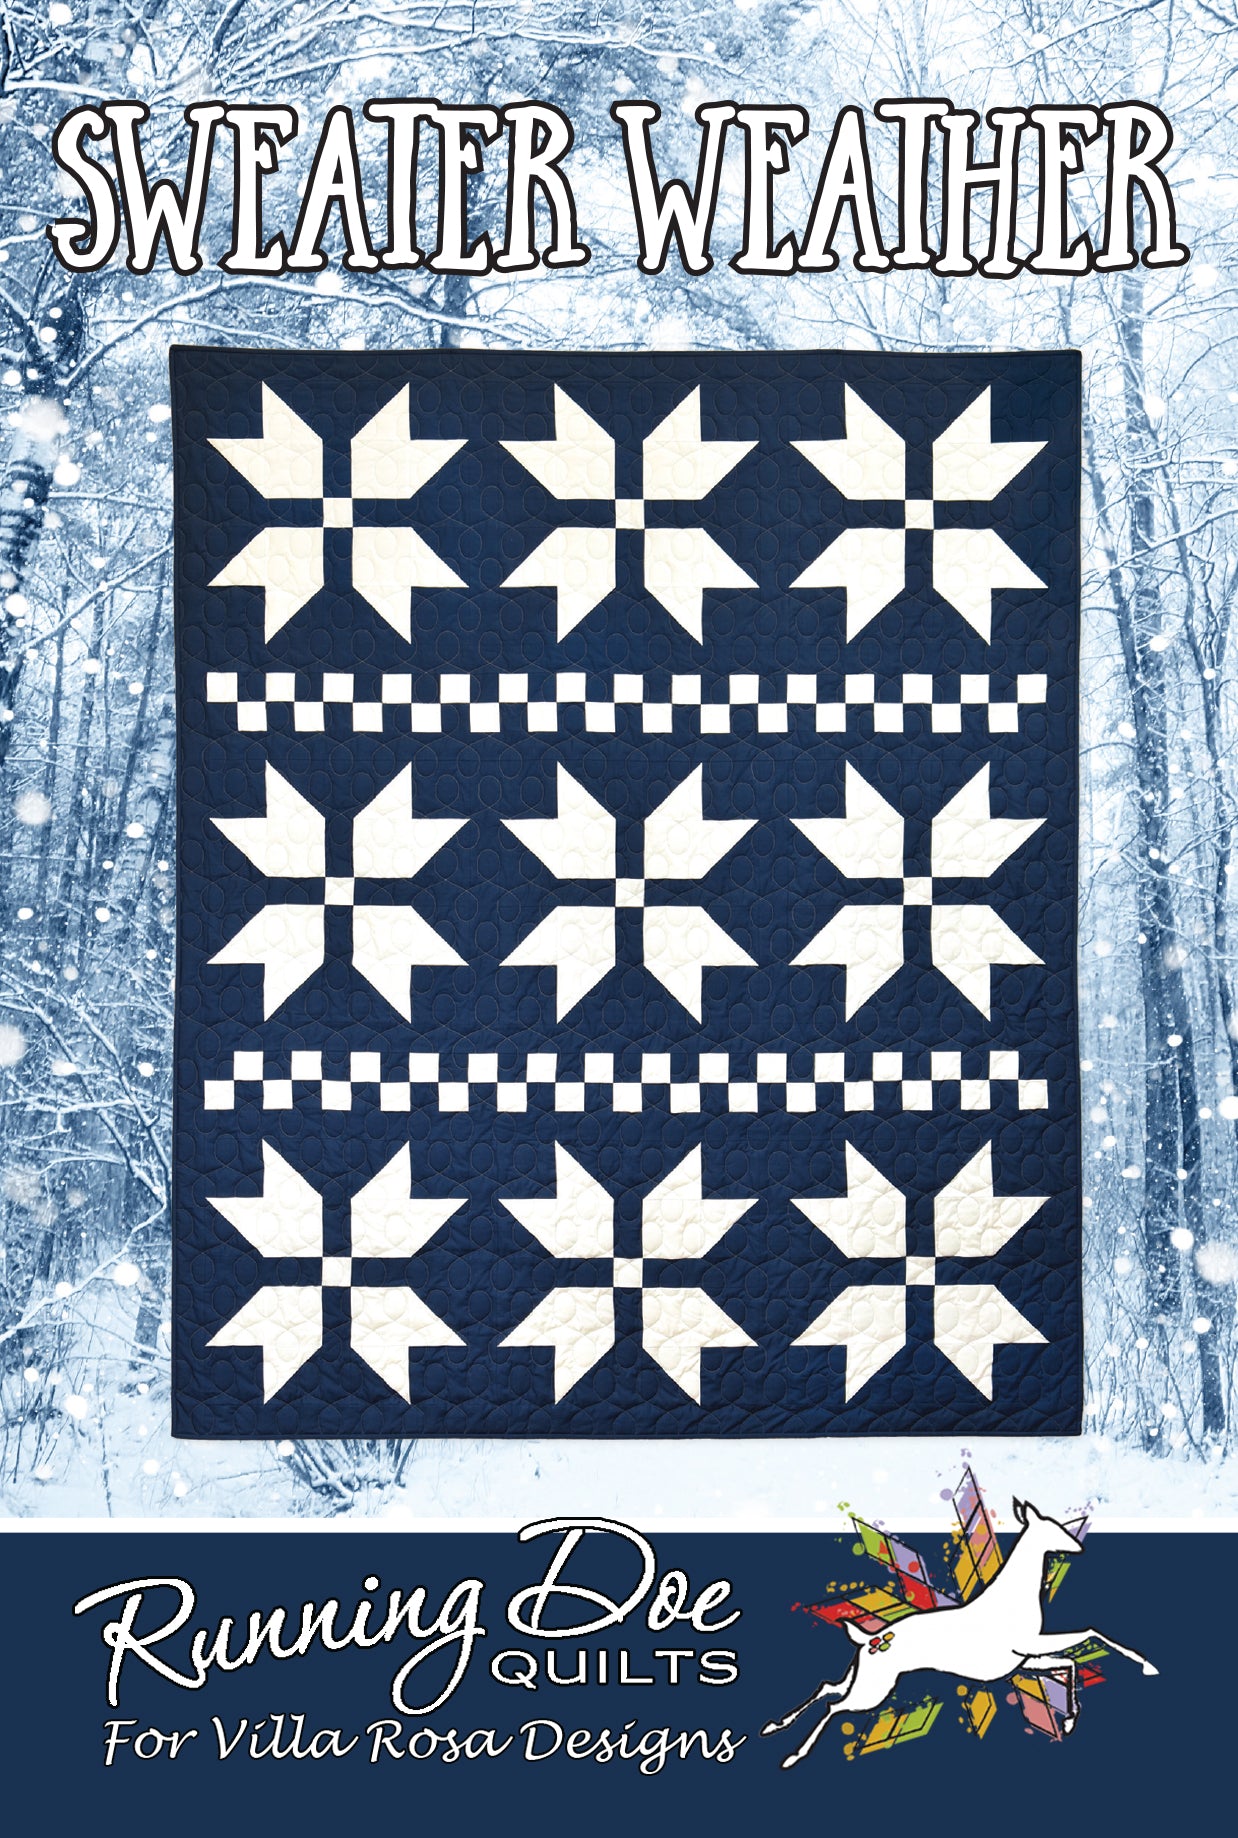 Sweater Weather PDF Quilt Pattern by Villa Rosa Designs